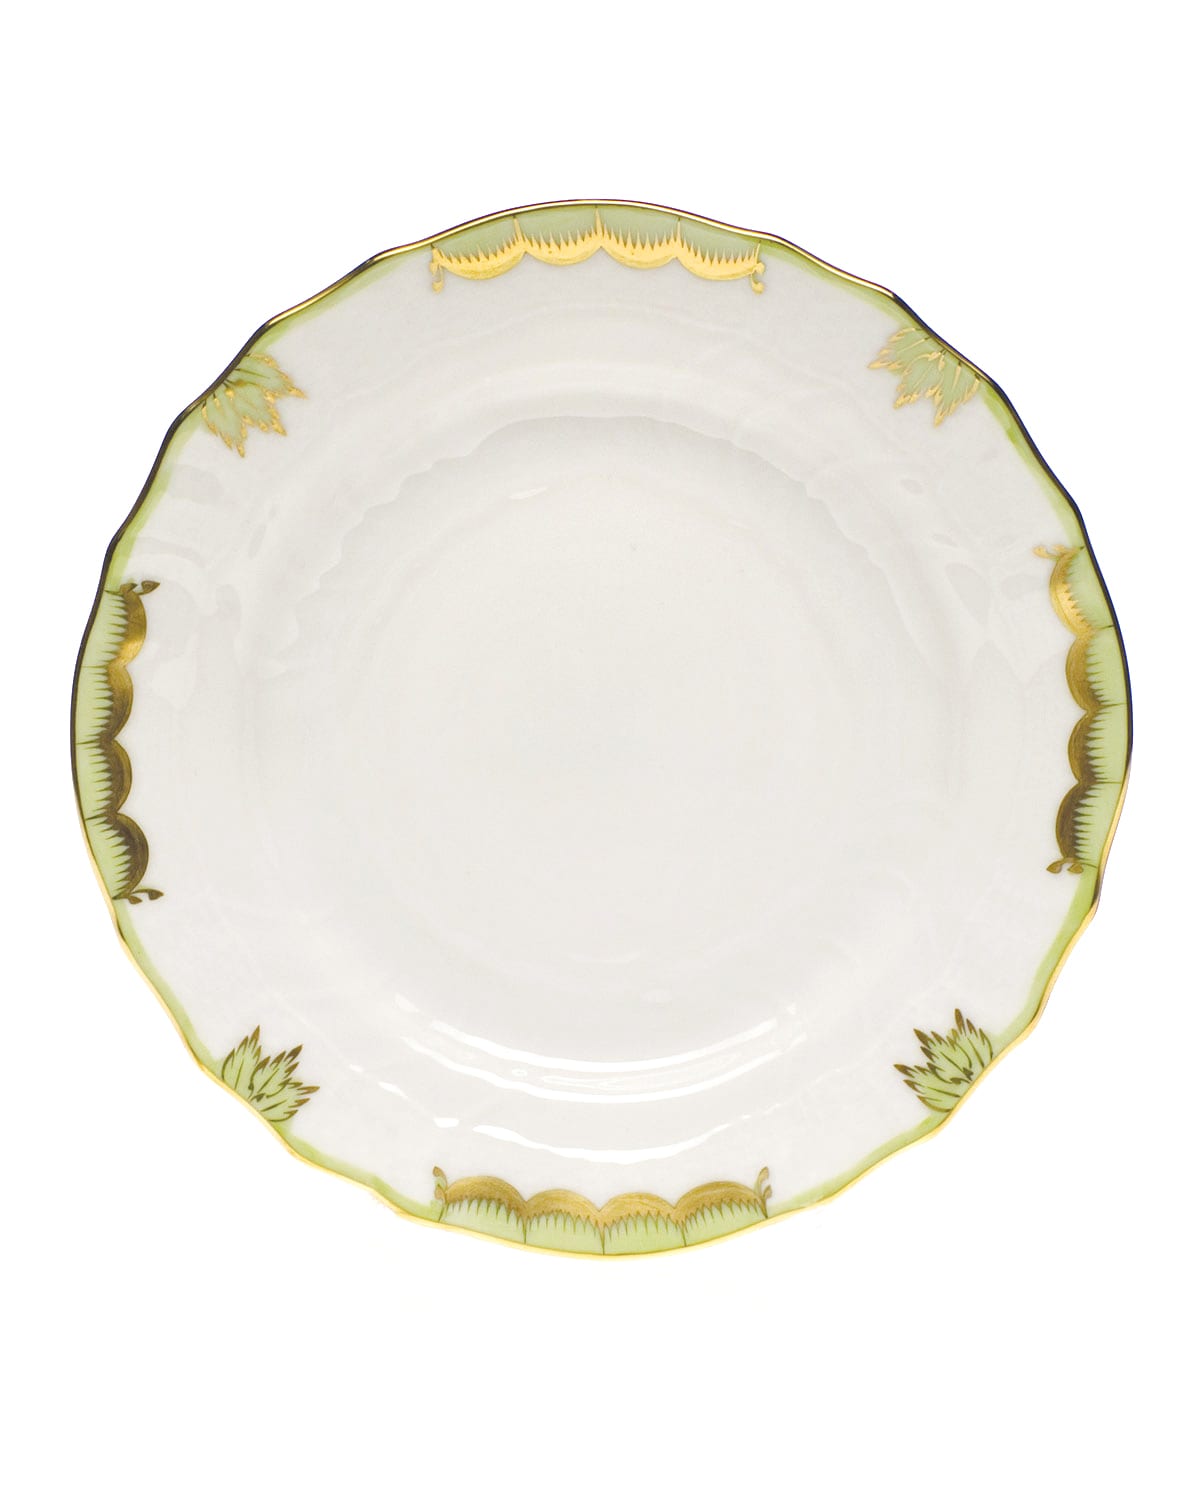 Herend Princess Victoria Bread & Butter Plate In Green